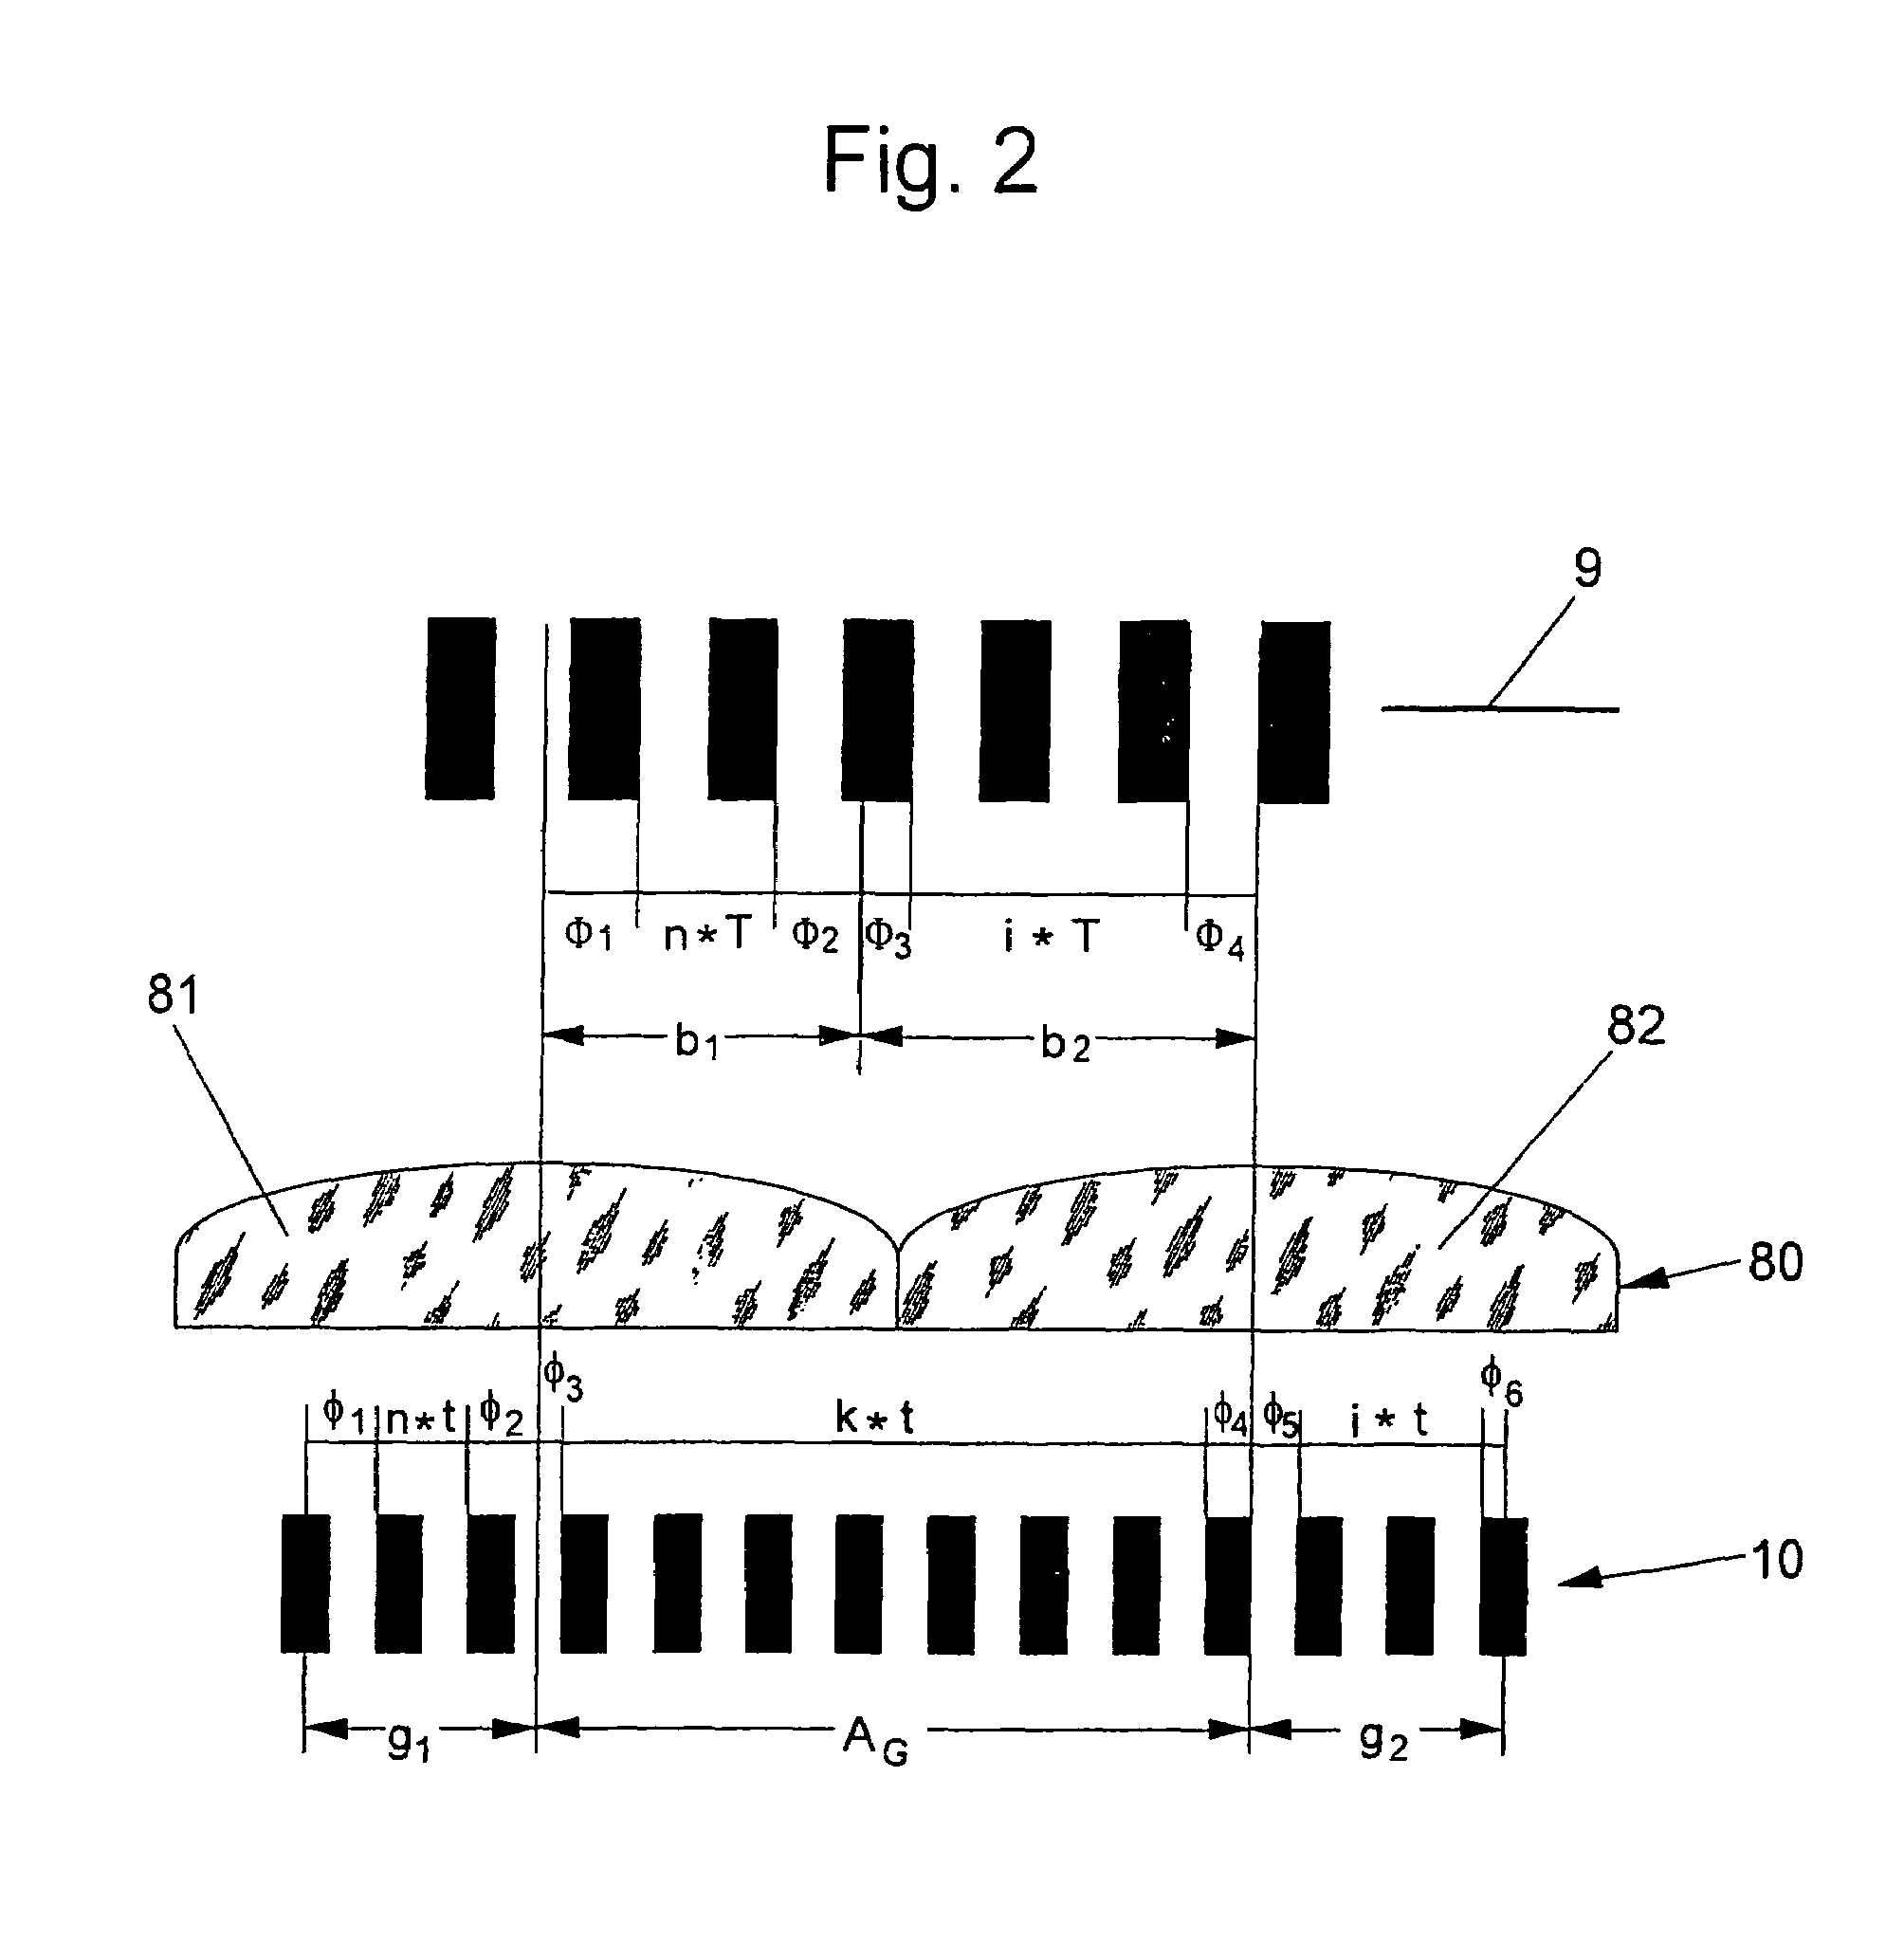 Optical position measuring device